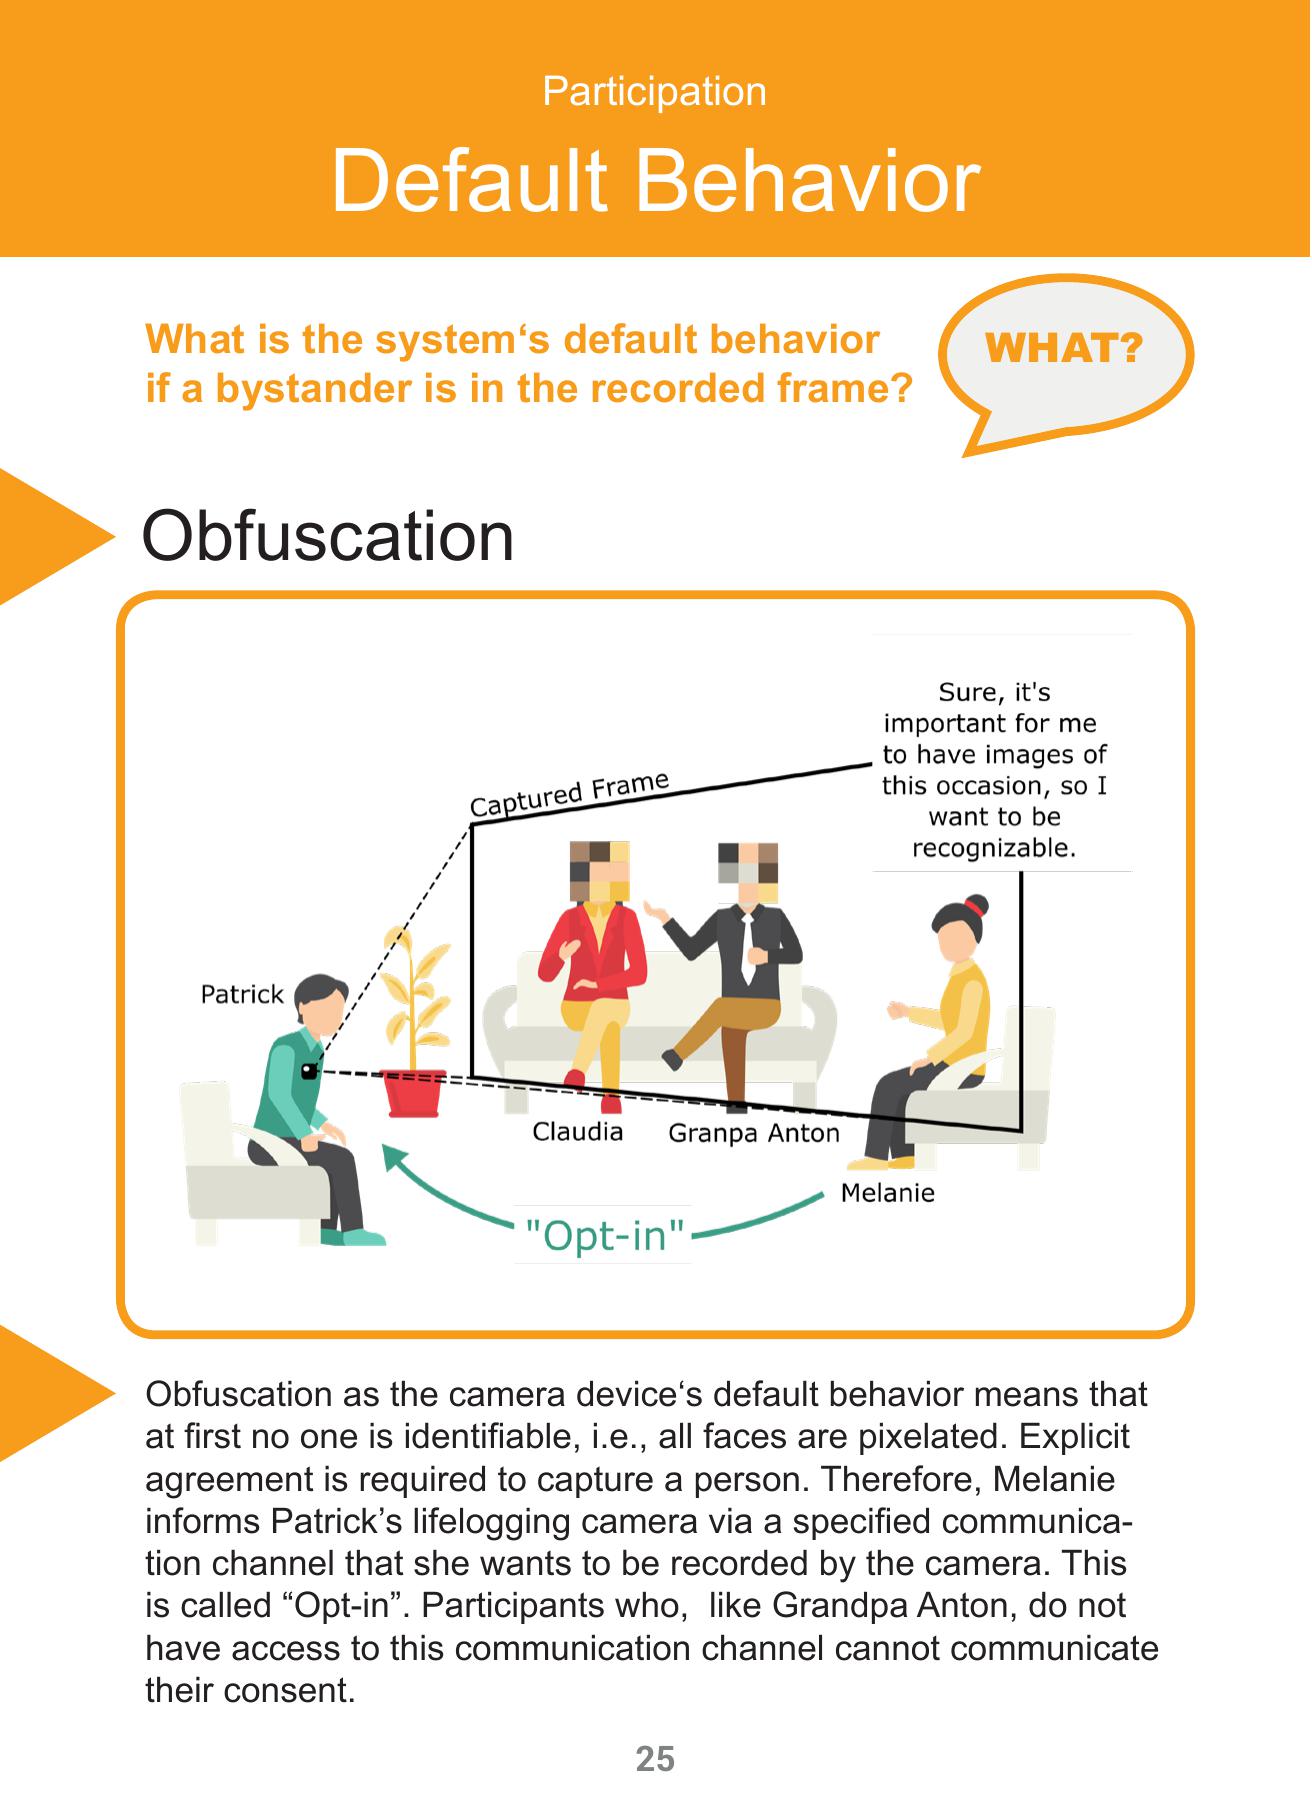 The image shows the back of a card. At the top there is a header with a orange background, the rest of the card has a white background. The header has the word Participation in small letters and the word Default Behavior in bigger letters in it. Below the header is a heading that says Impulses, to the left of it is a orange triangle. Below that is a speech bubble with the words How do I tell the system that I want to be recognizable on the recordings? Do I need a device for that? If I provided consent to a recording, can I withdraw it retrospectively? The speech bubble is pointing to a person. Below the speech bubble and to the left of the person is a paragraph stating There are cards to help you finding an answer to Melanie’s questions. Have a look at these categories Below the paragraph are the names of three cards Communication Channel Participation Timing Participation Inclusion & Exclusion